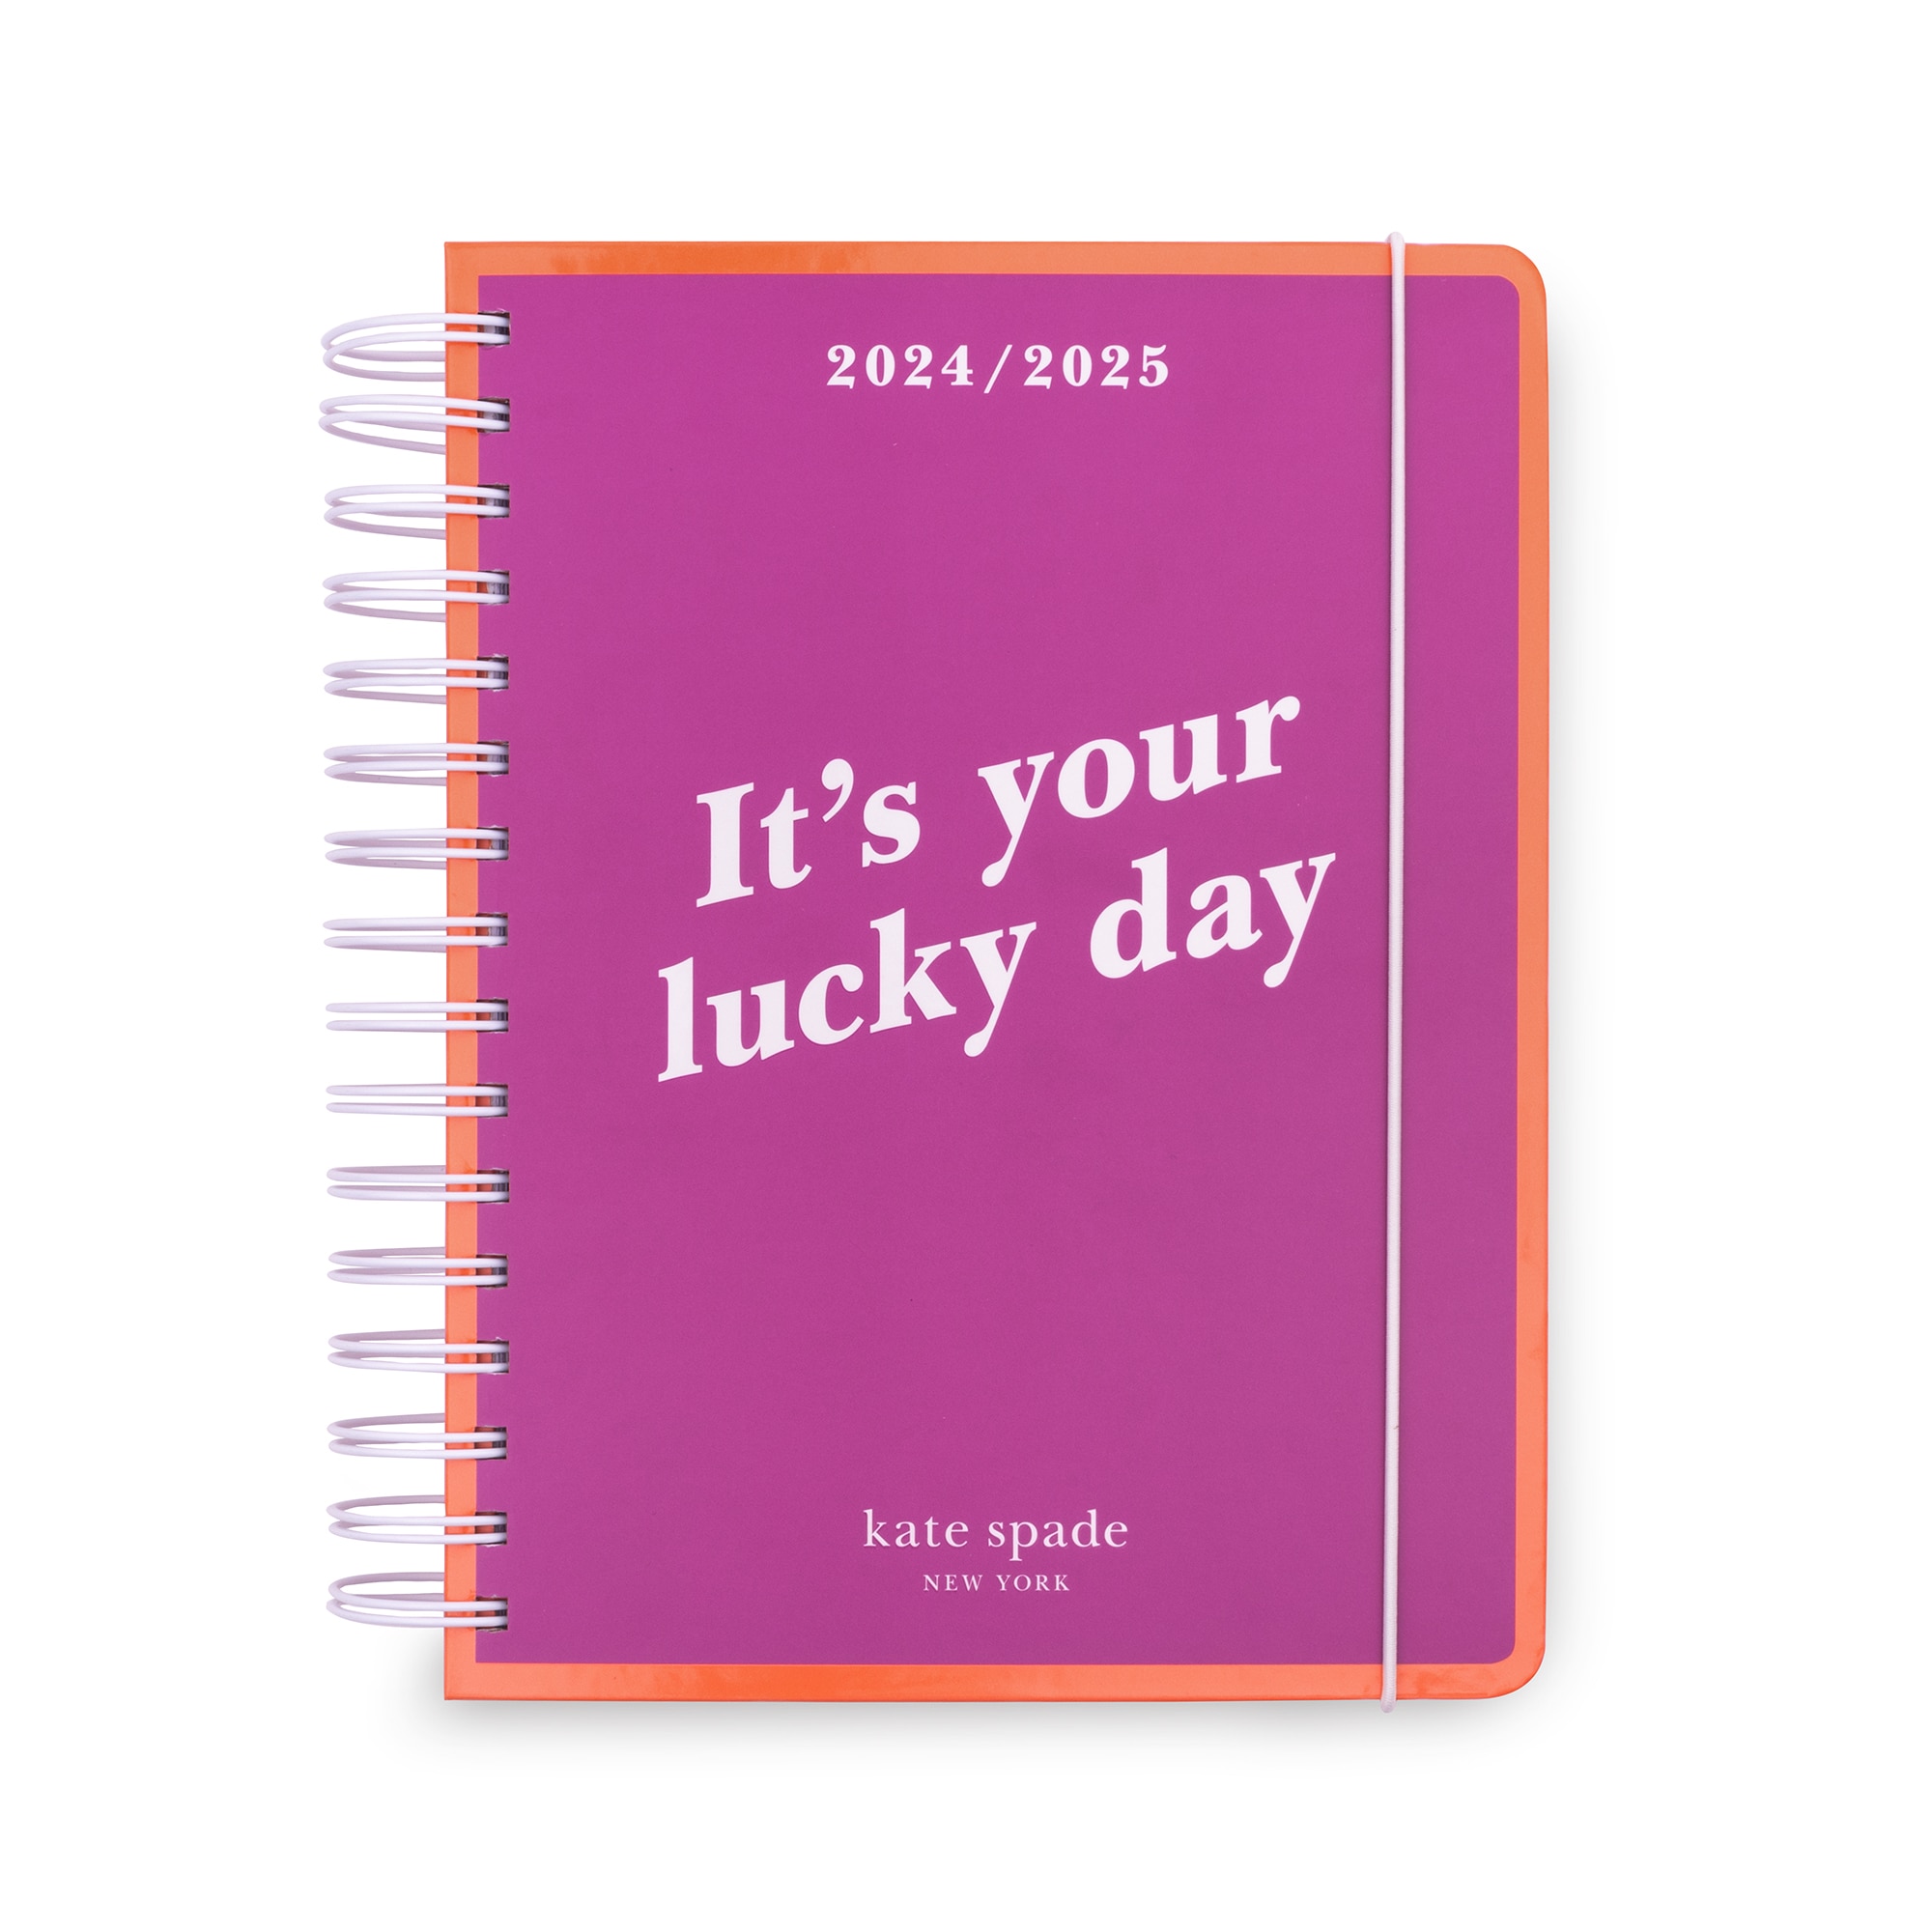 Kate Spade Large Your Lucky Day '24-'25 Planner